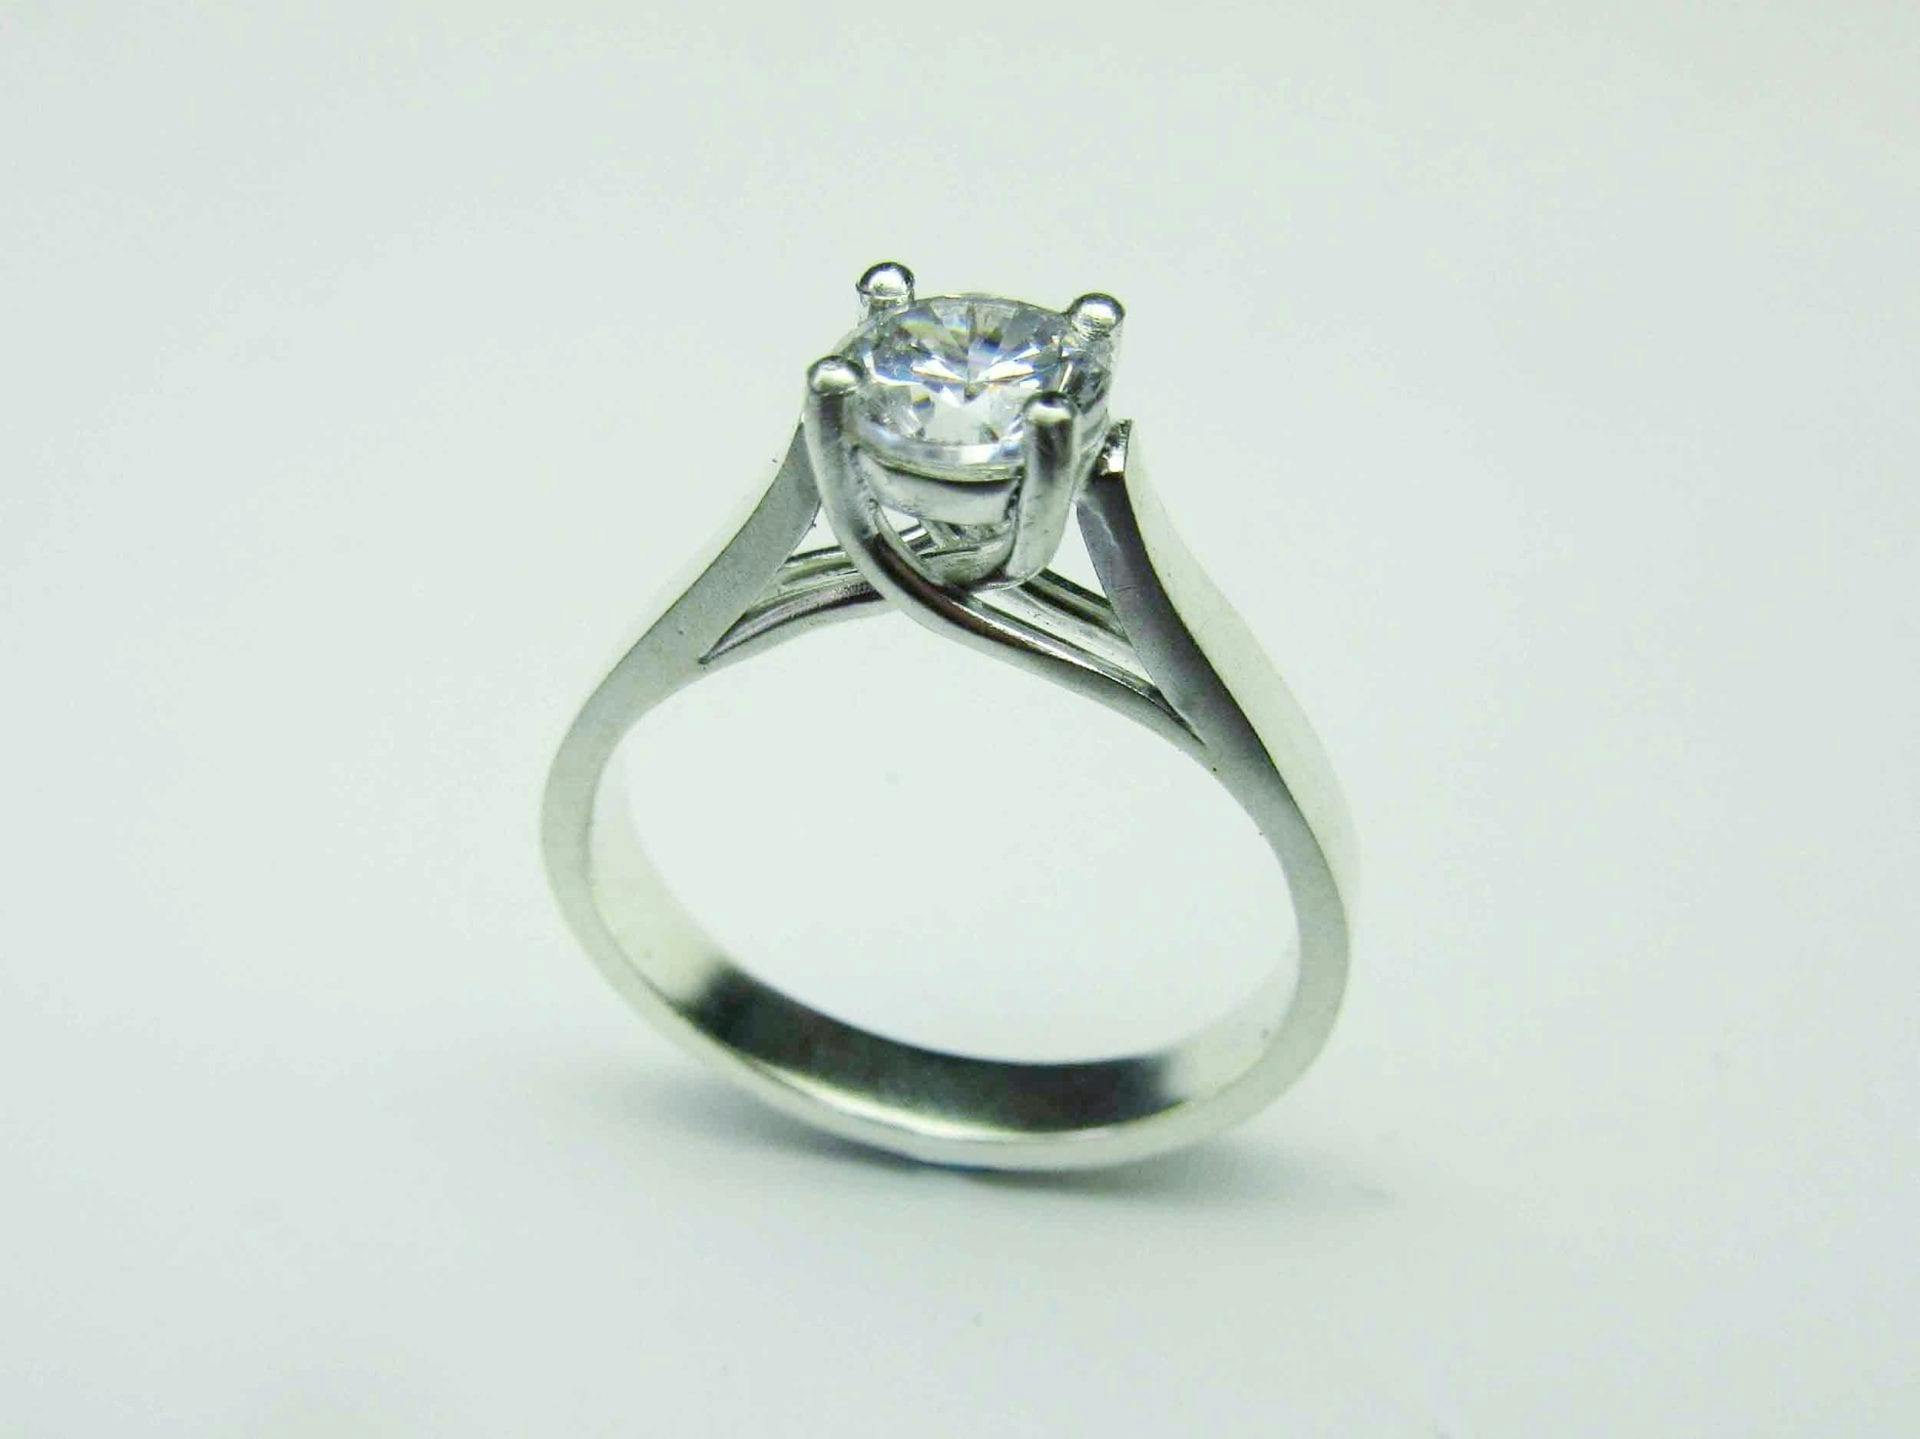 How to Make a Crossover Basket Solitaire Ring